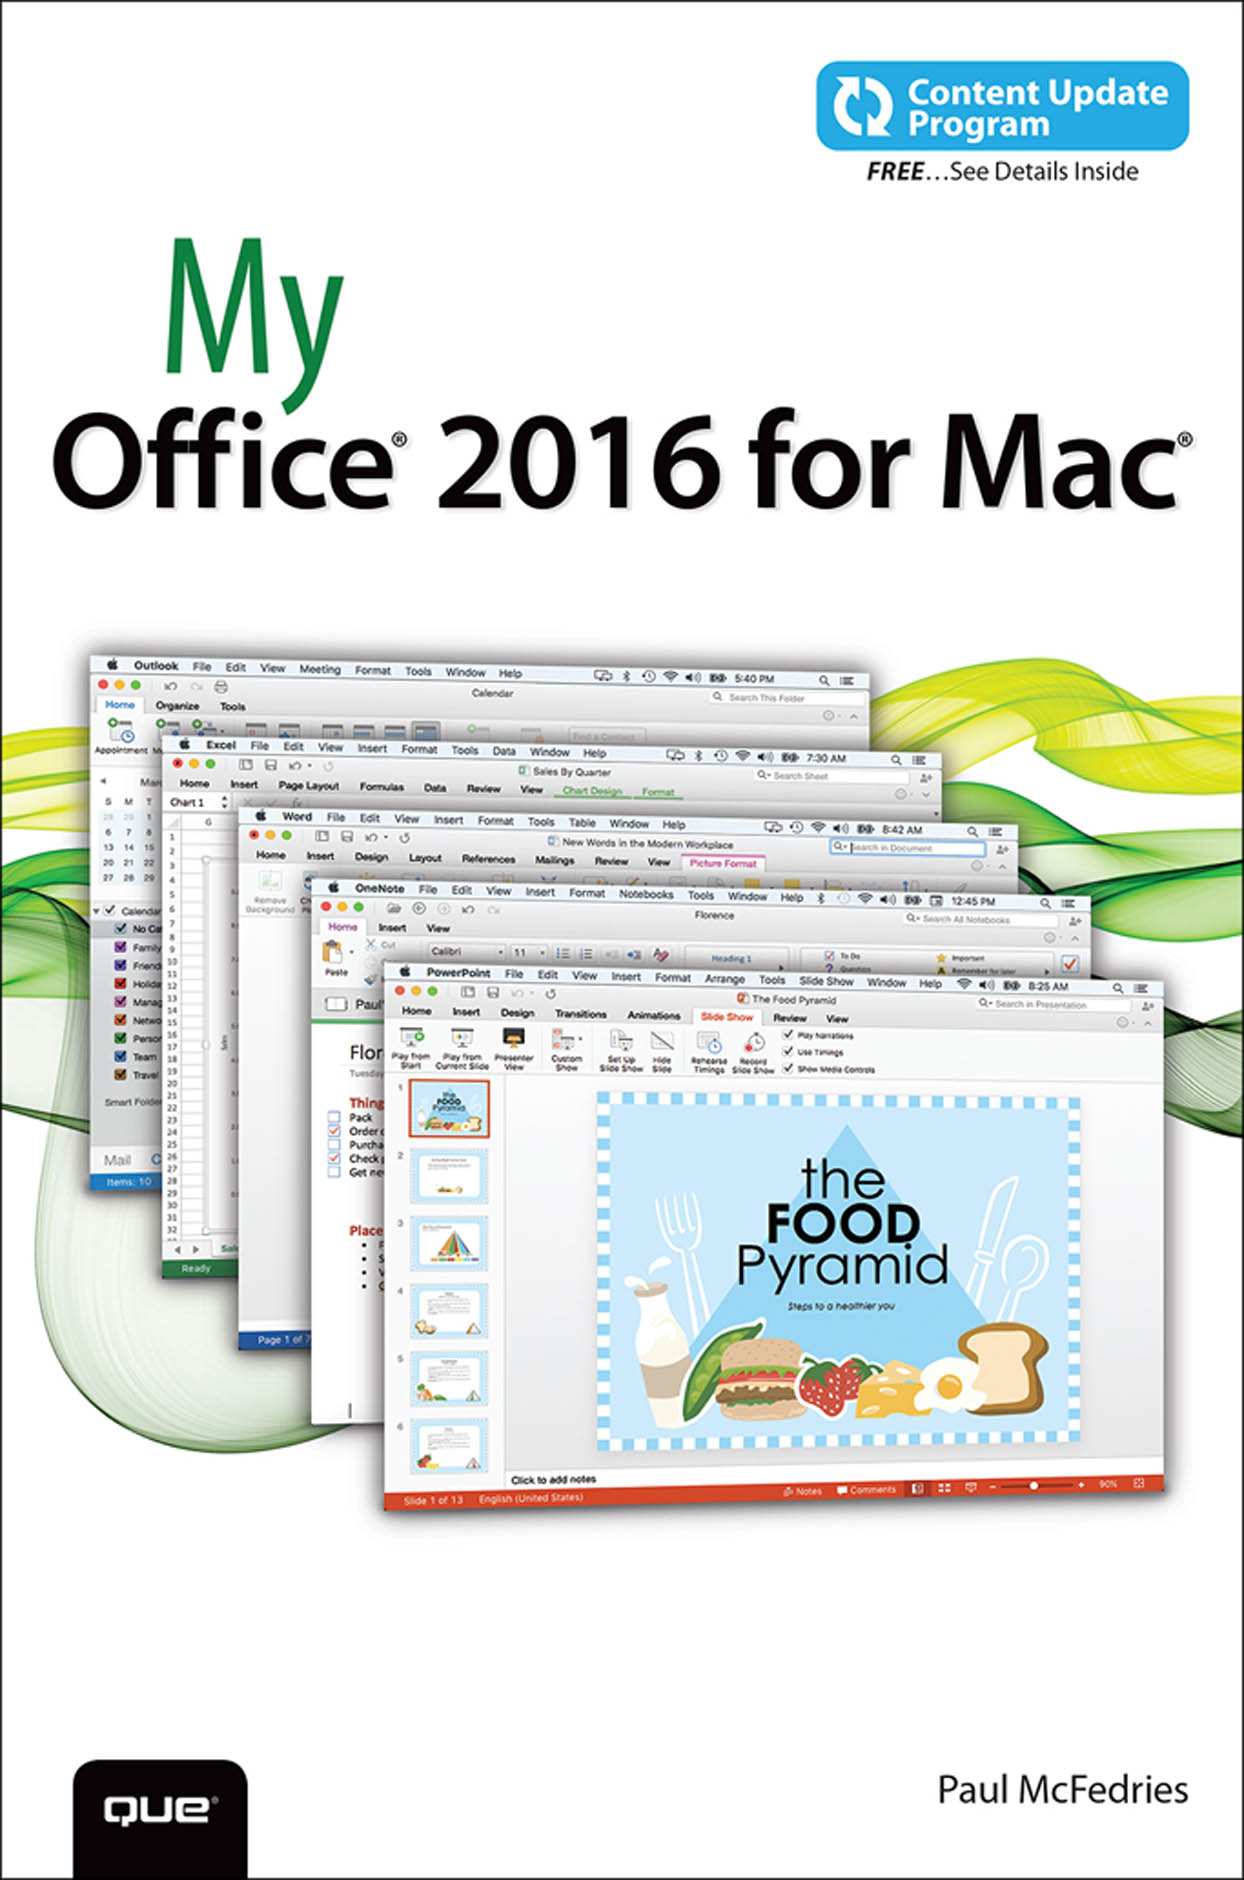 office 2016 for mac excel review